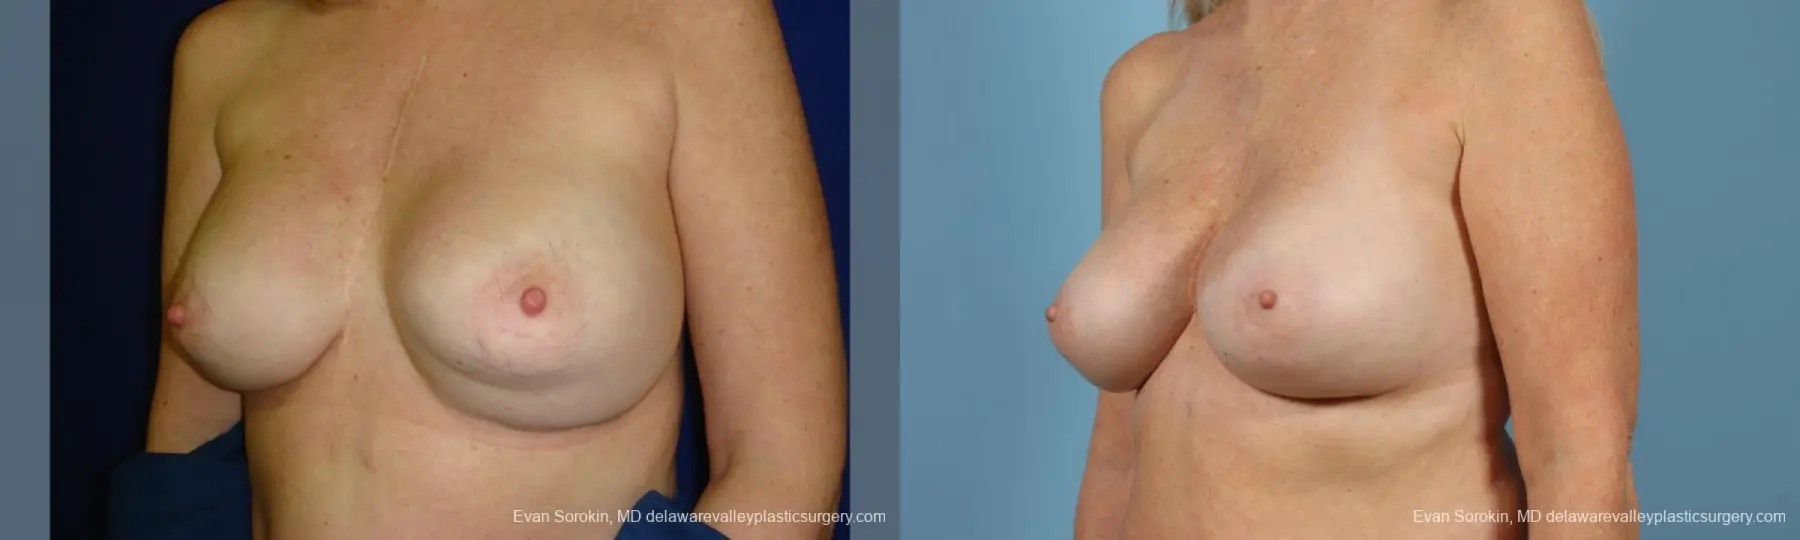 Philadelphia Breast Augmentation 9457 - Before and After 2